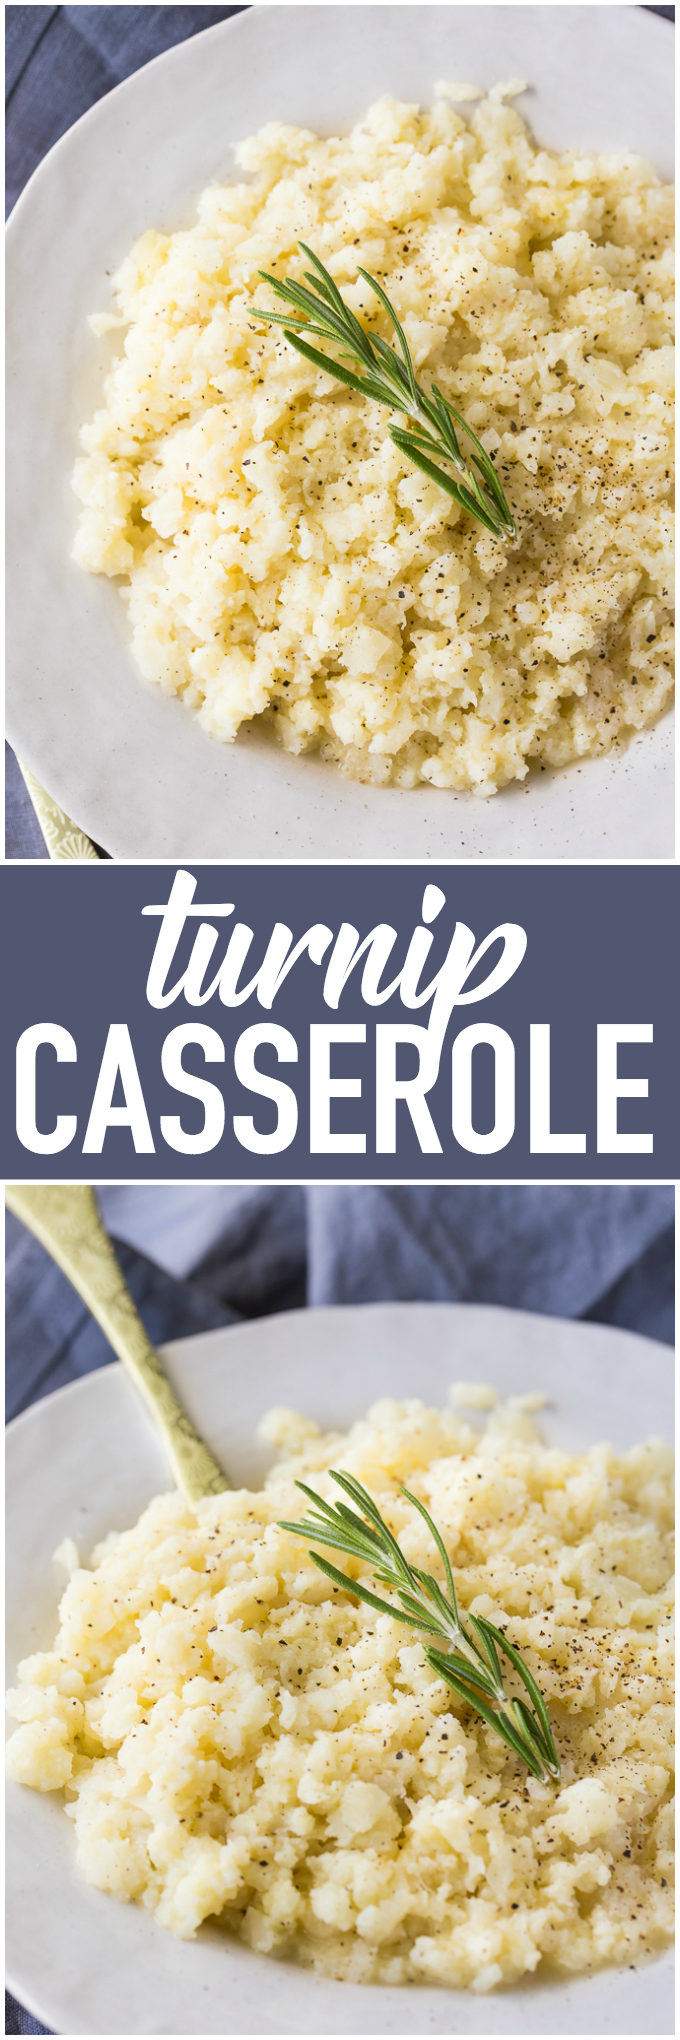 Turnip Casserole - An easy holiday side dish your family will love. Make these turnips delicious with just sugar, butter, and milk.